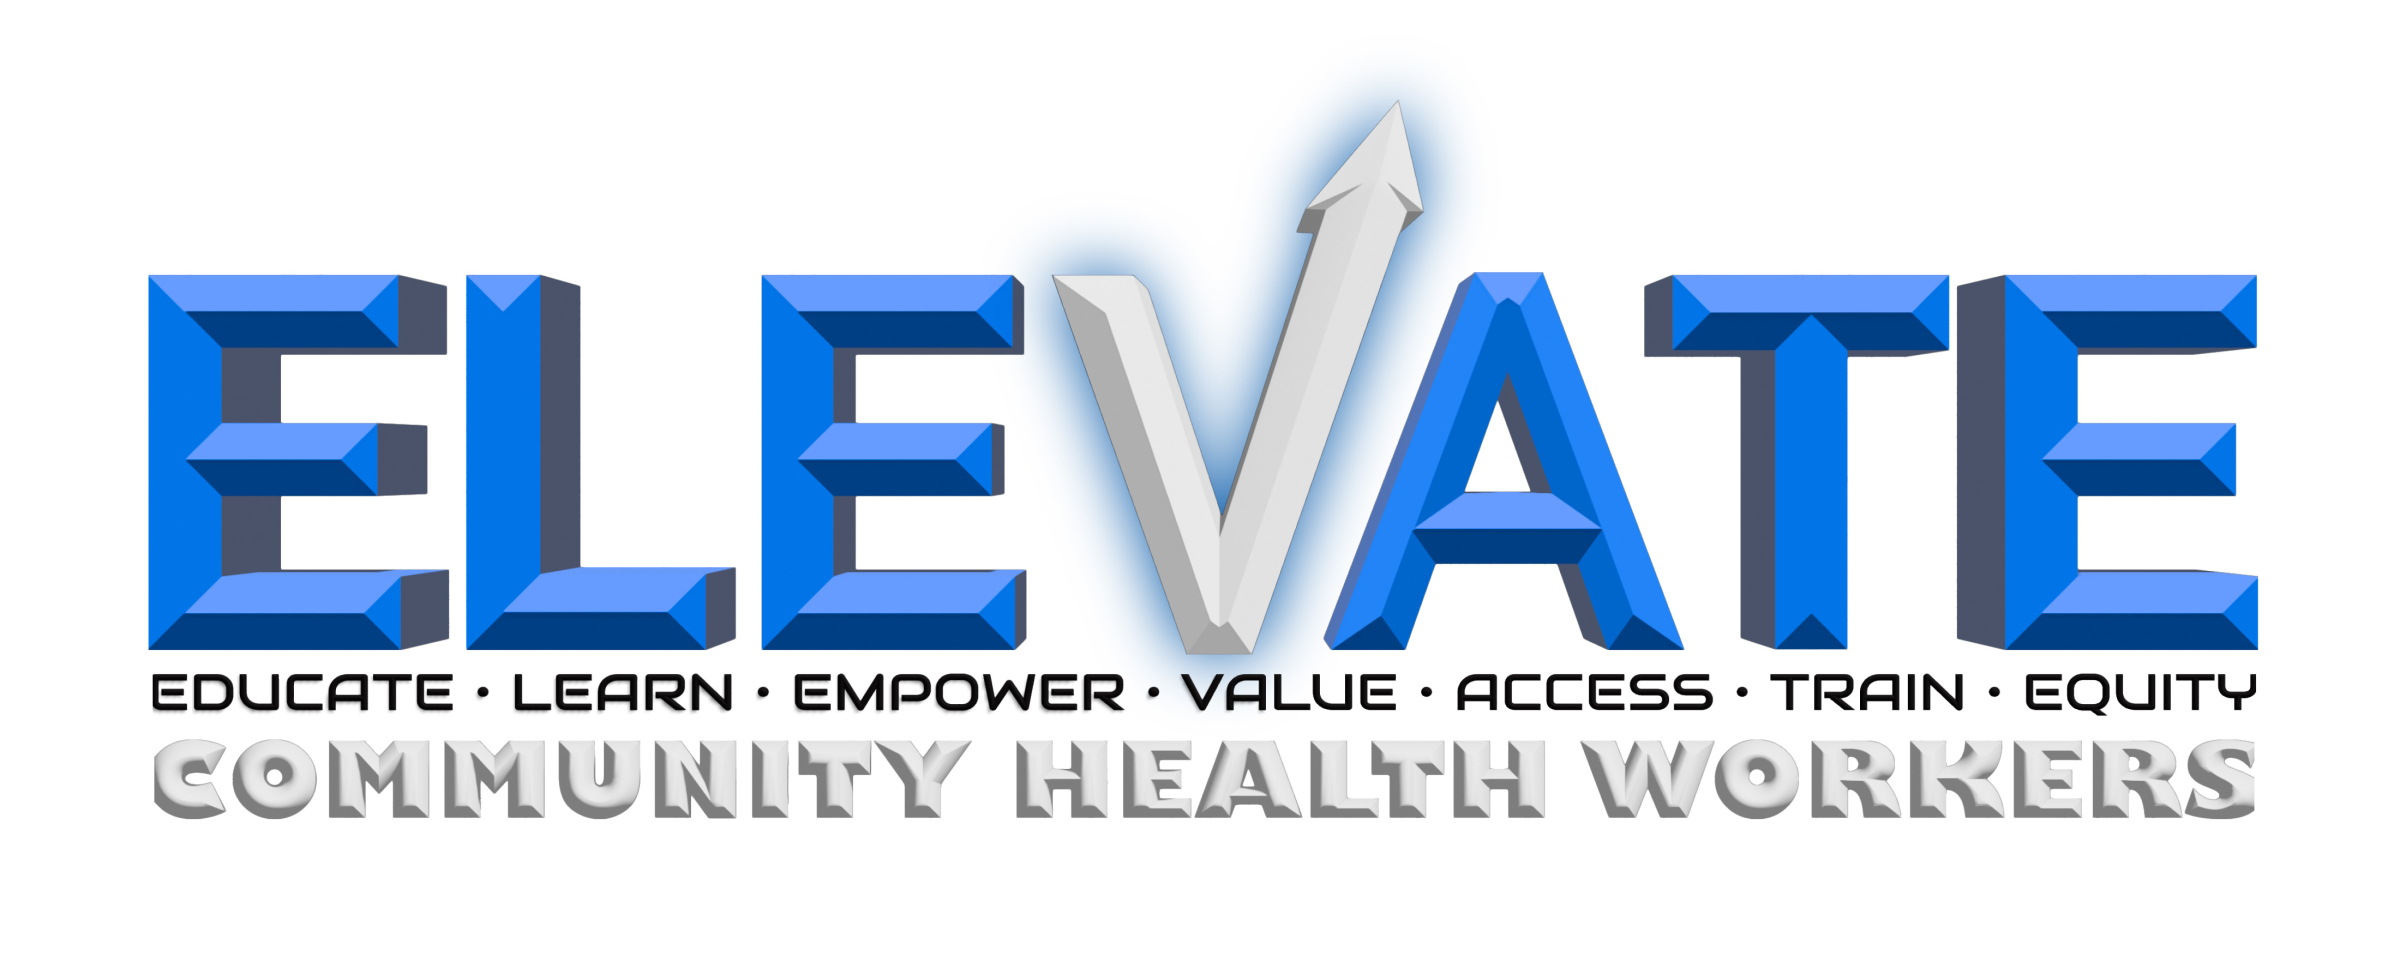 ELEVATE (Educate, Lead, Empower, Value, Access, Train, and Equity) logo. Community Health Workers.